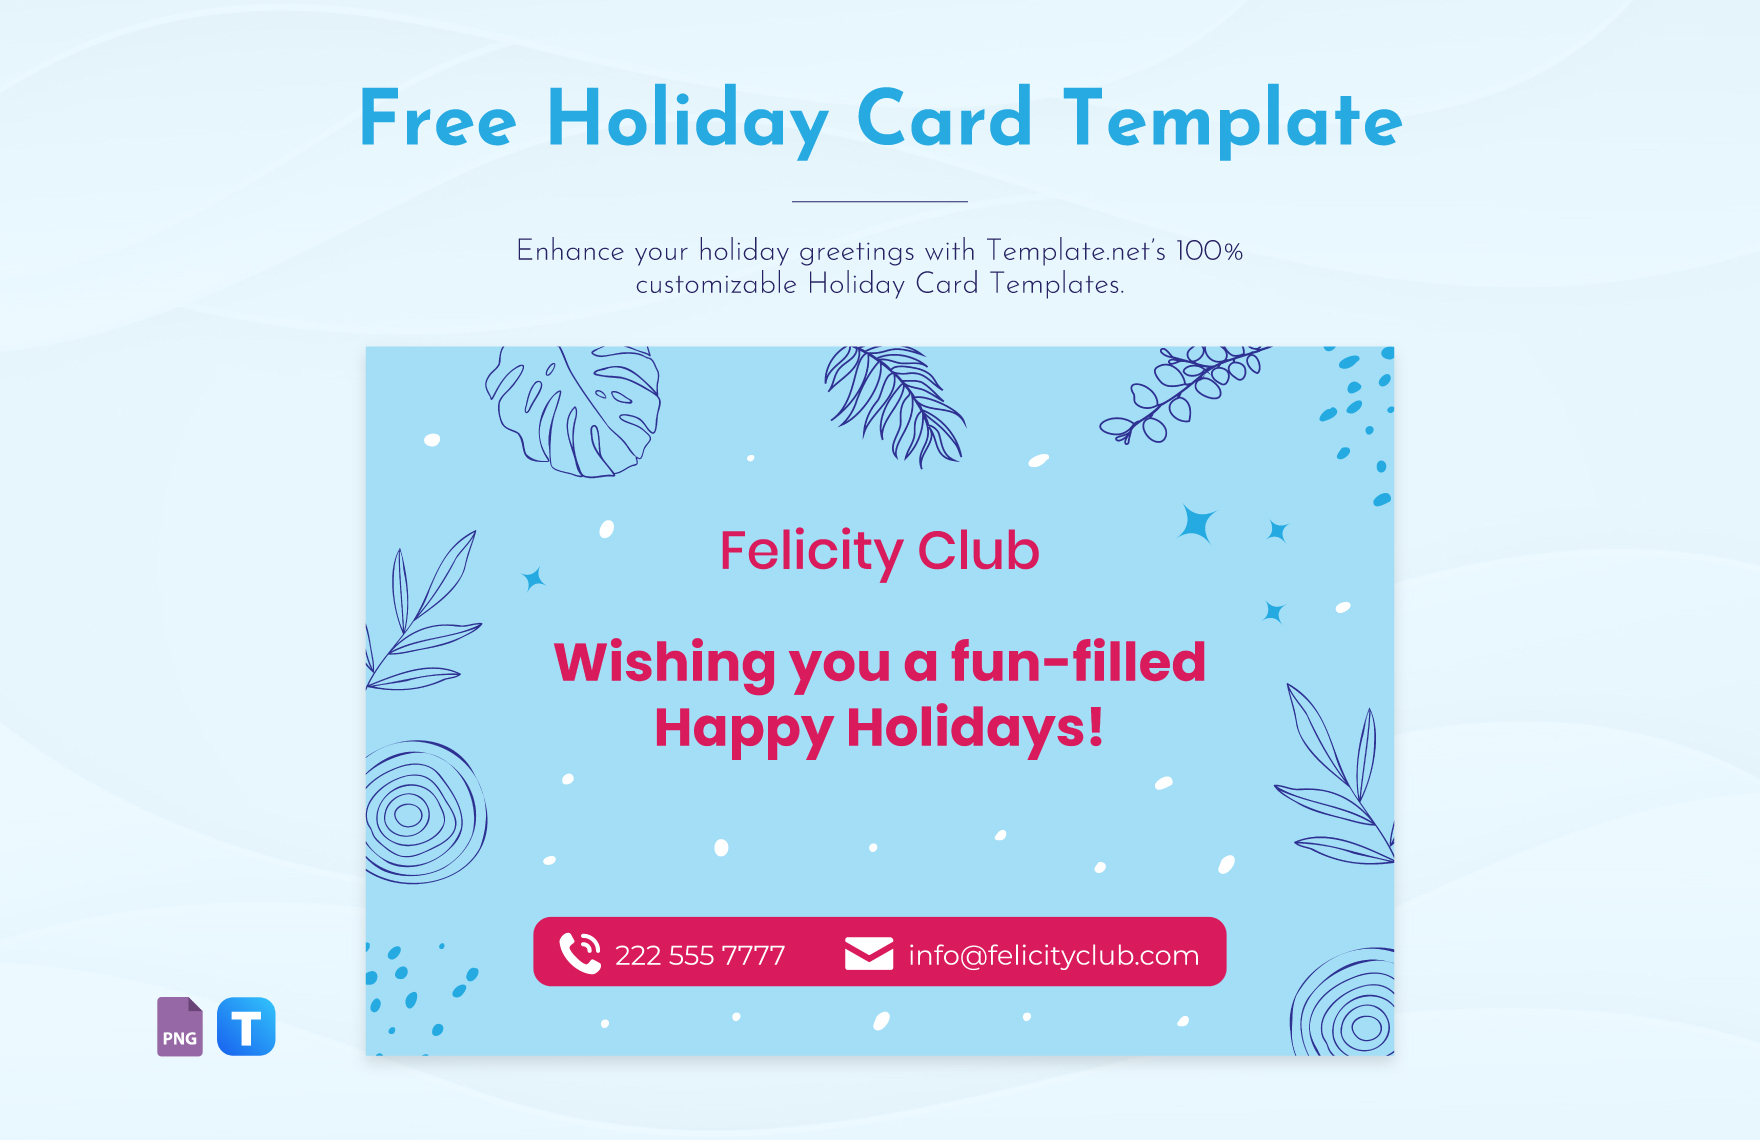 Free Holiday Card Template in PNG